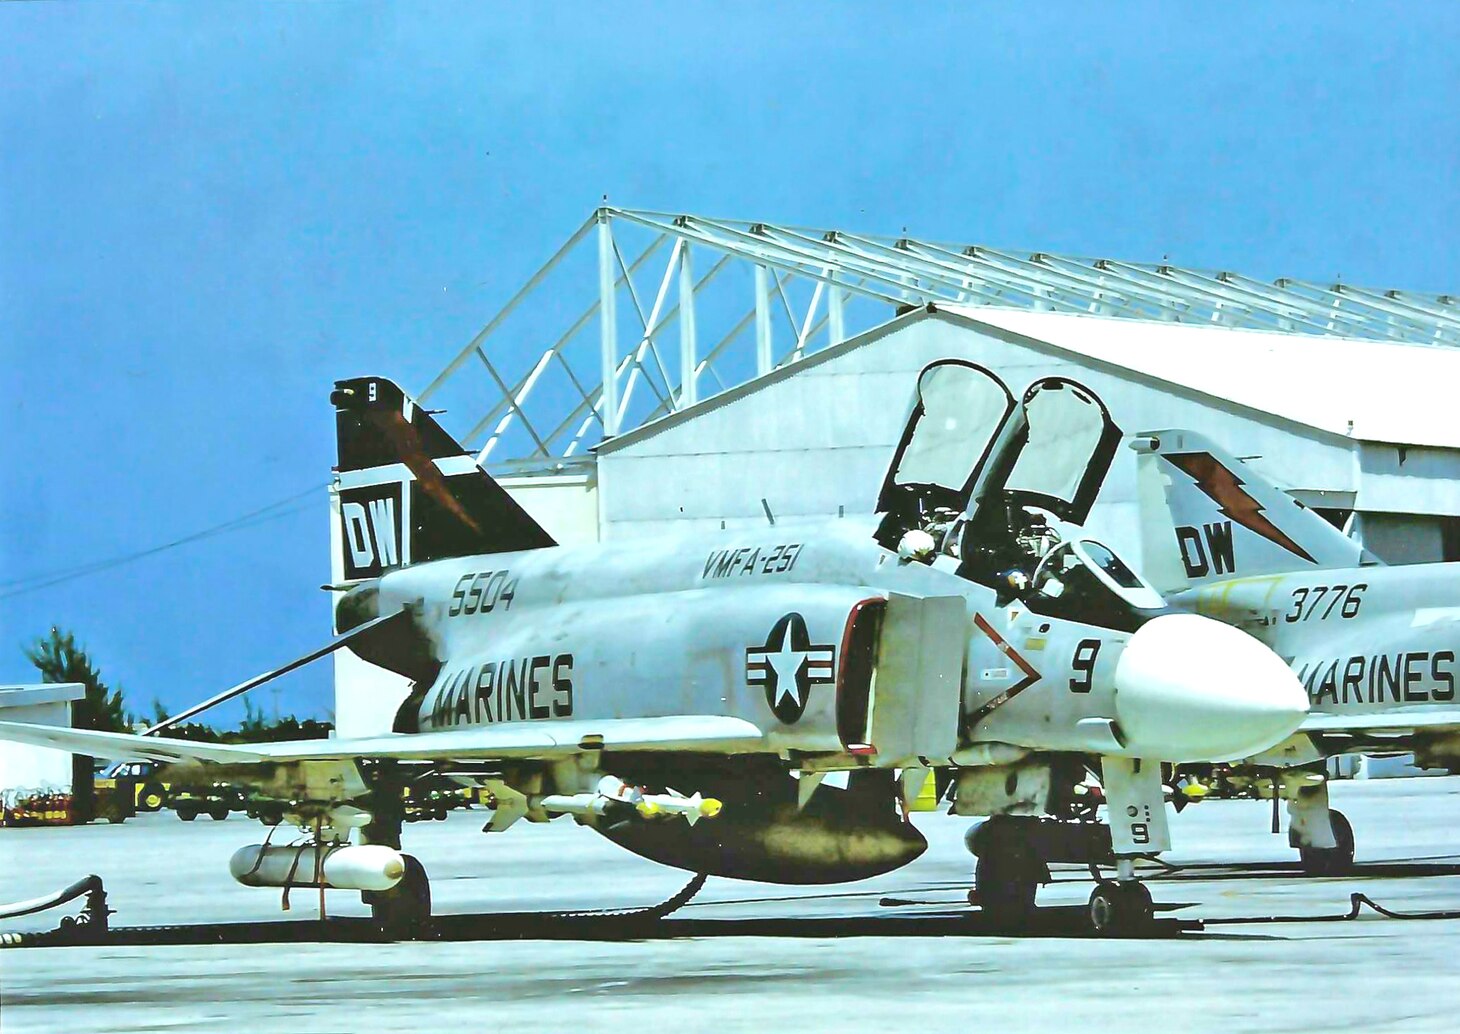 Taken at Key West in 1972, VMFA-251 was transitioning from the single orange thunderbolt to the thunderbolt with the dark blue background